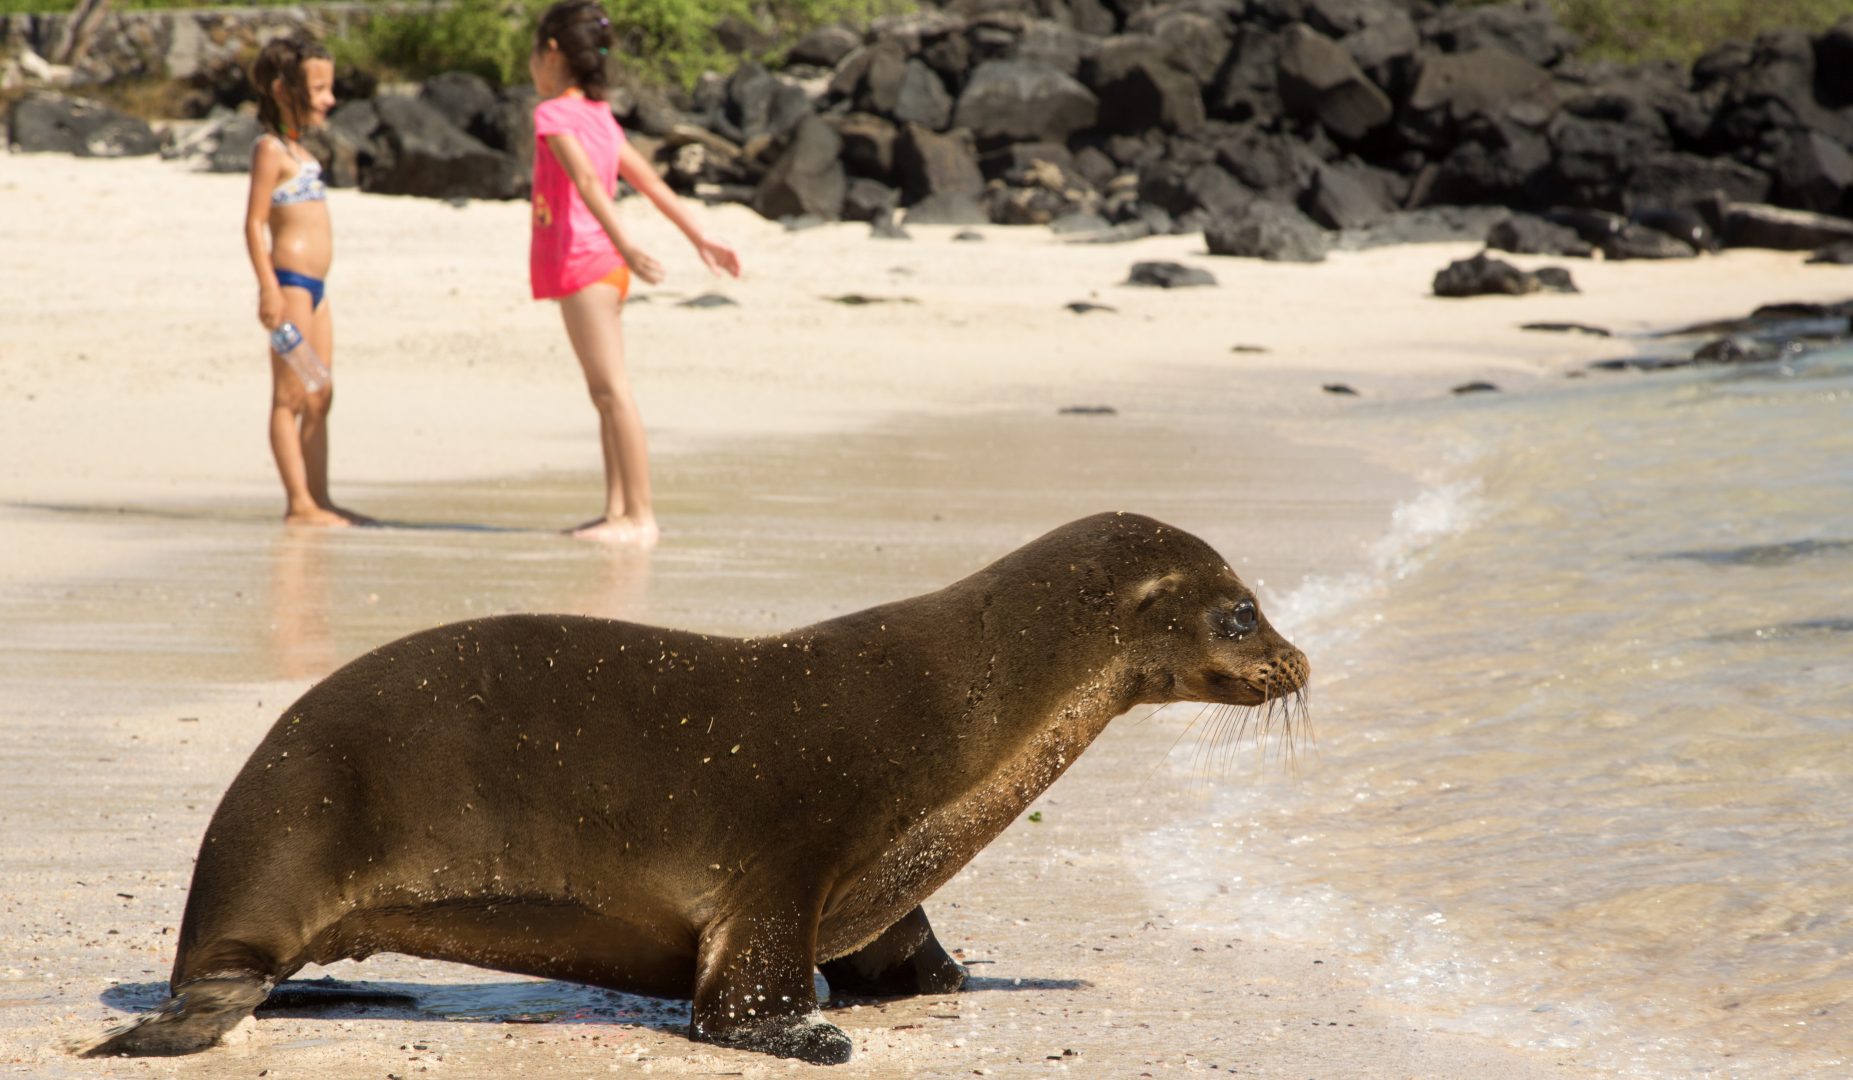 Galapagos sea lion with child